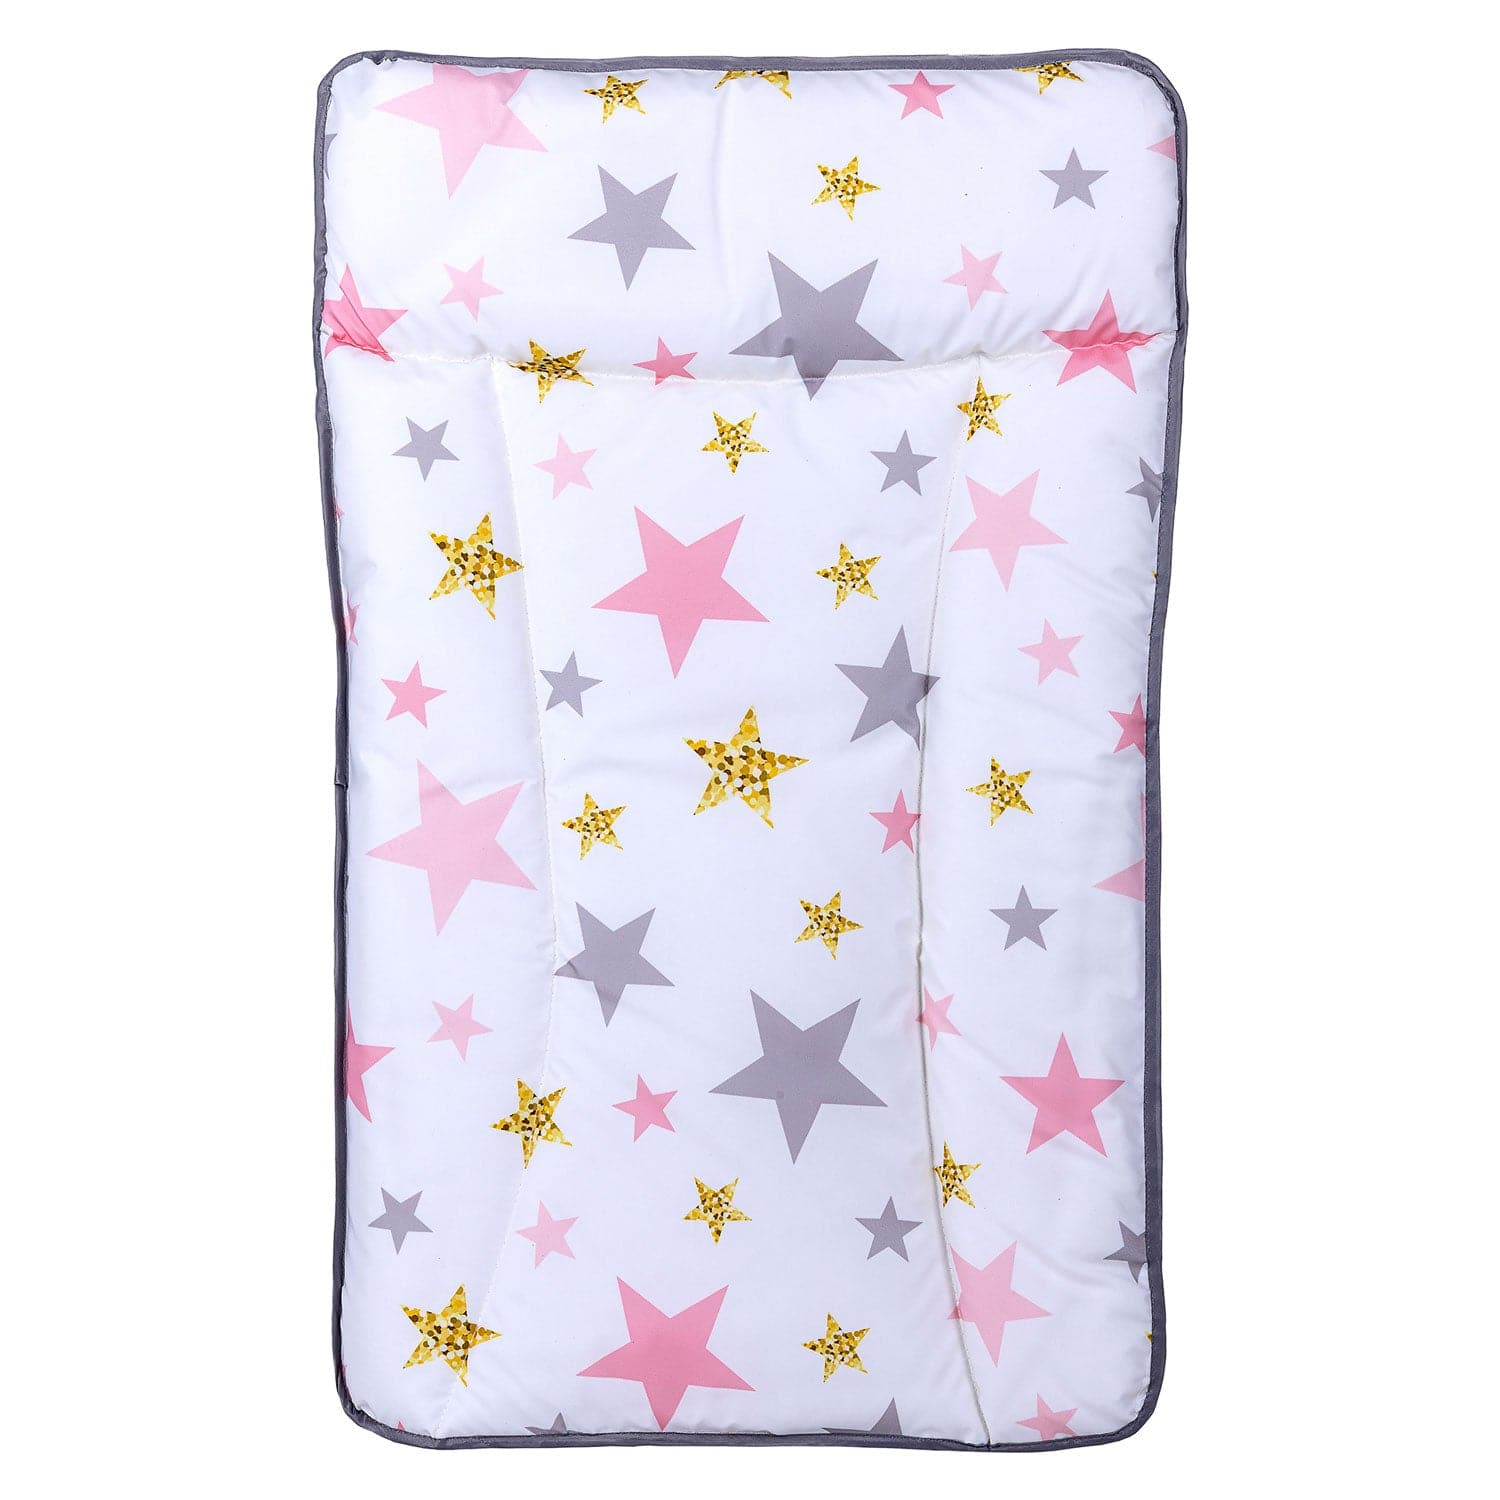 Deluxe Changing Mat - Pink And Gold Stars - For Your Little One